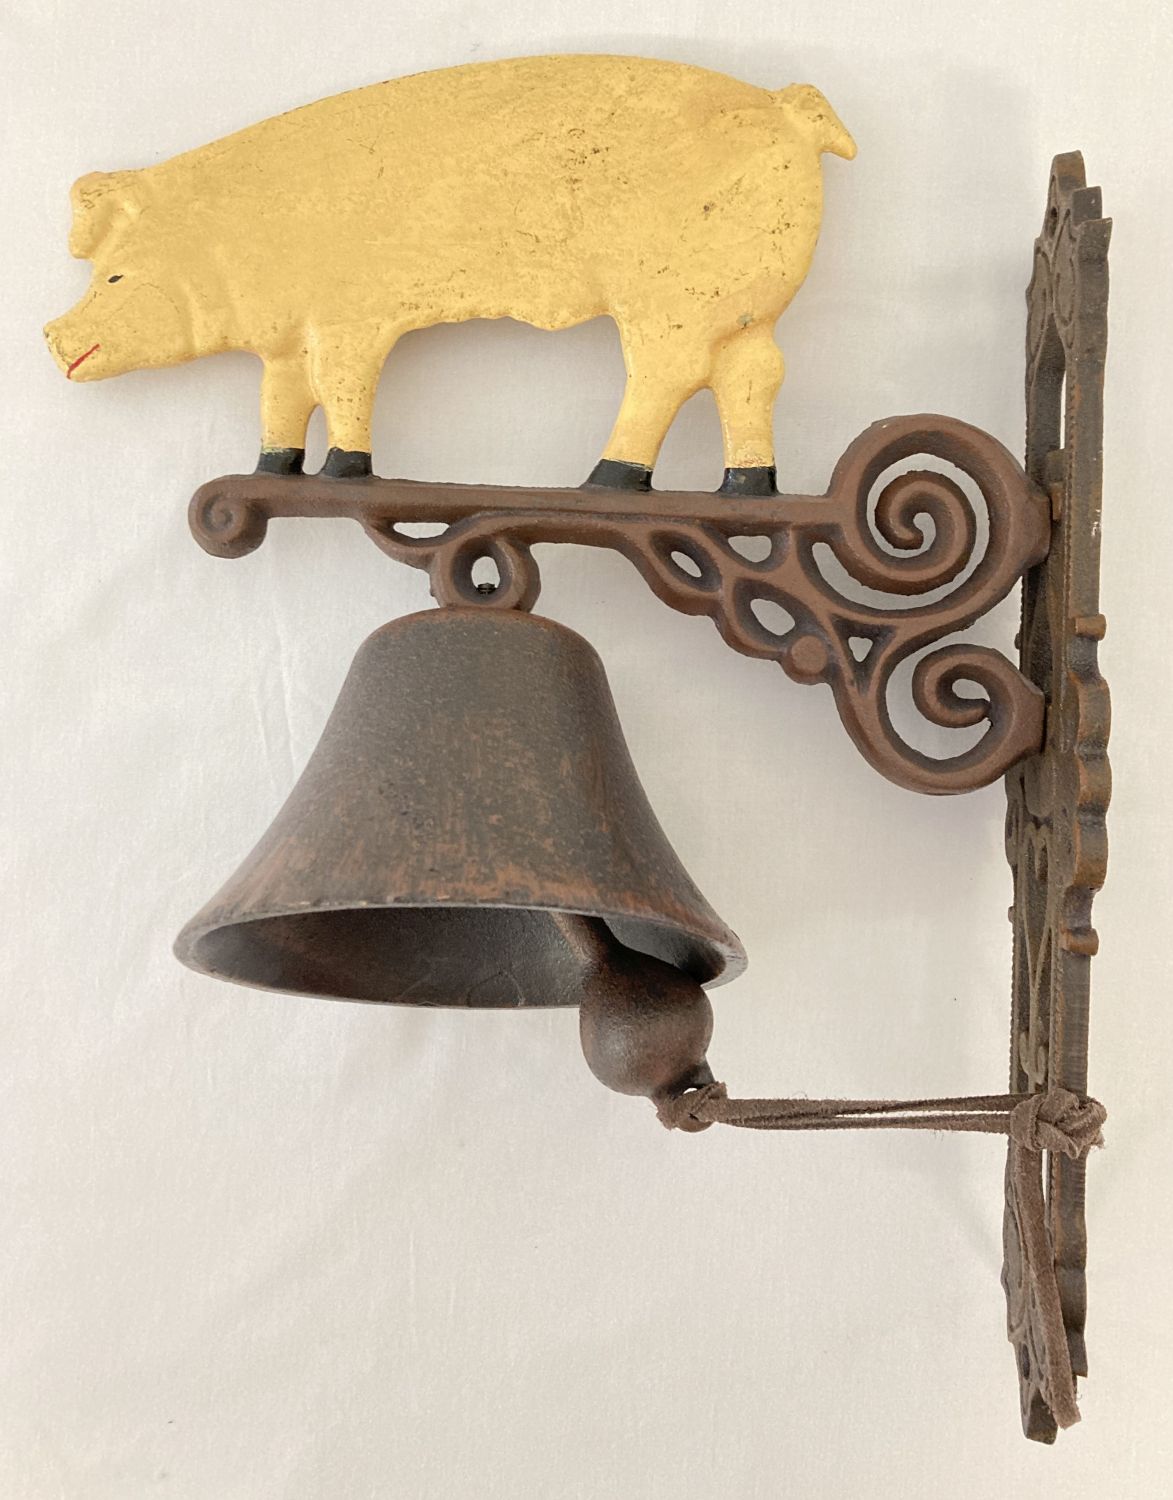 A painted cast metal wall hanging garden bell with pig design.